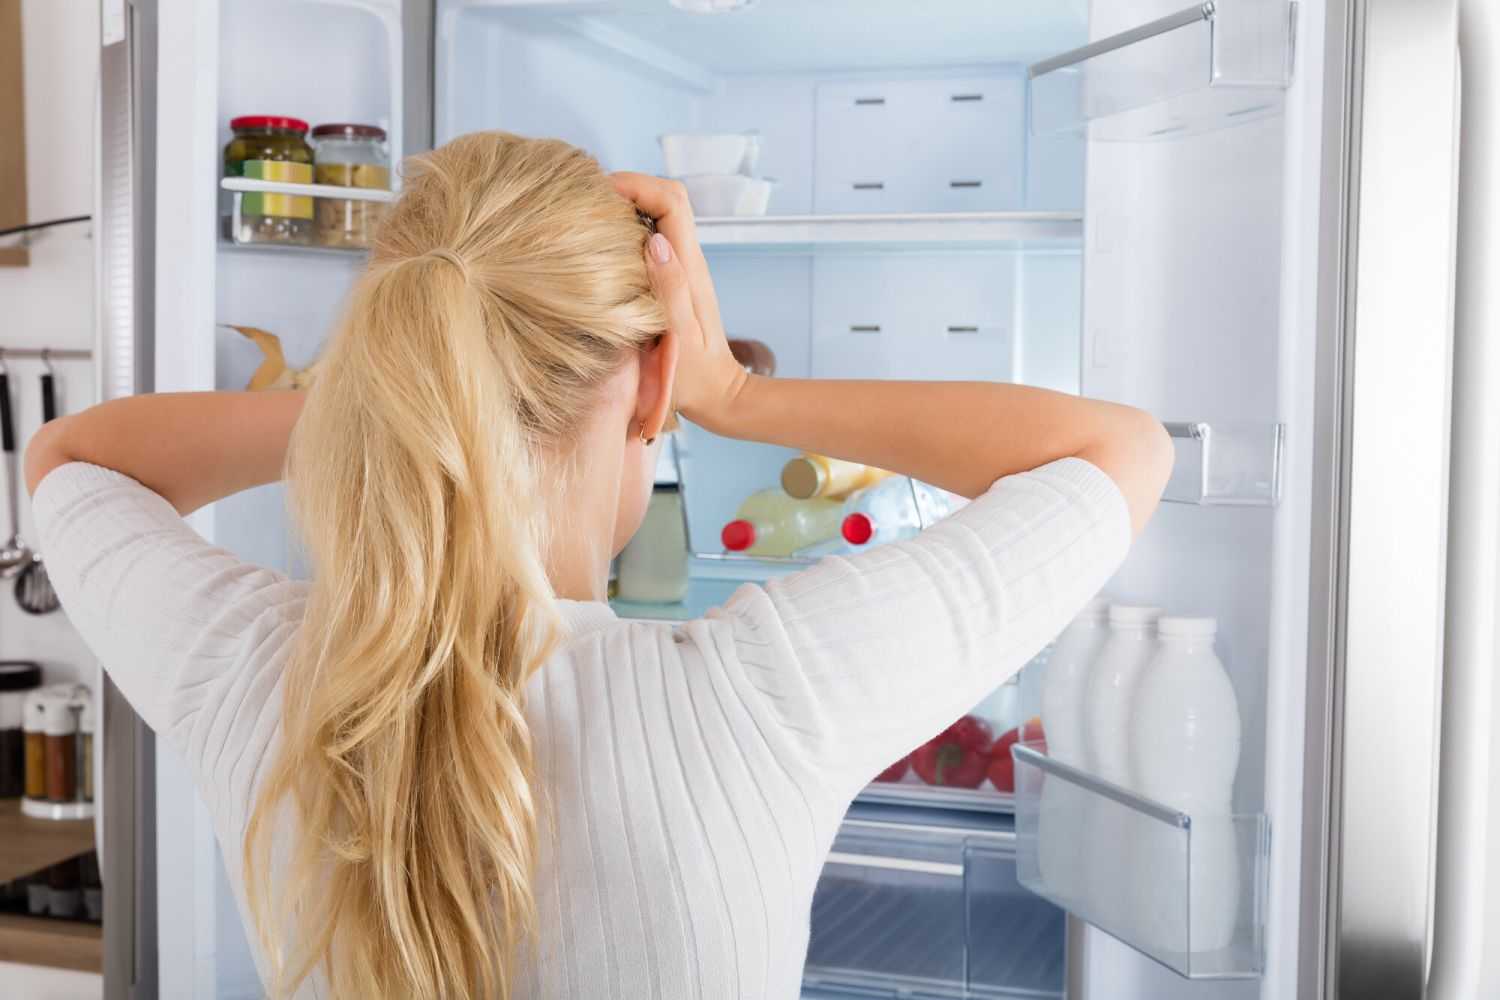 Woman looking into fridge with hands on head trying to figure out what to eat.